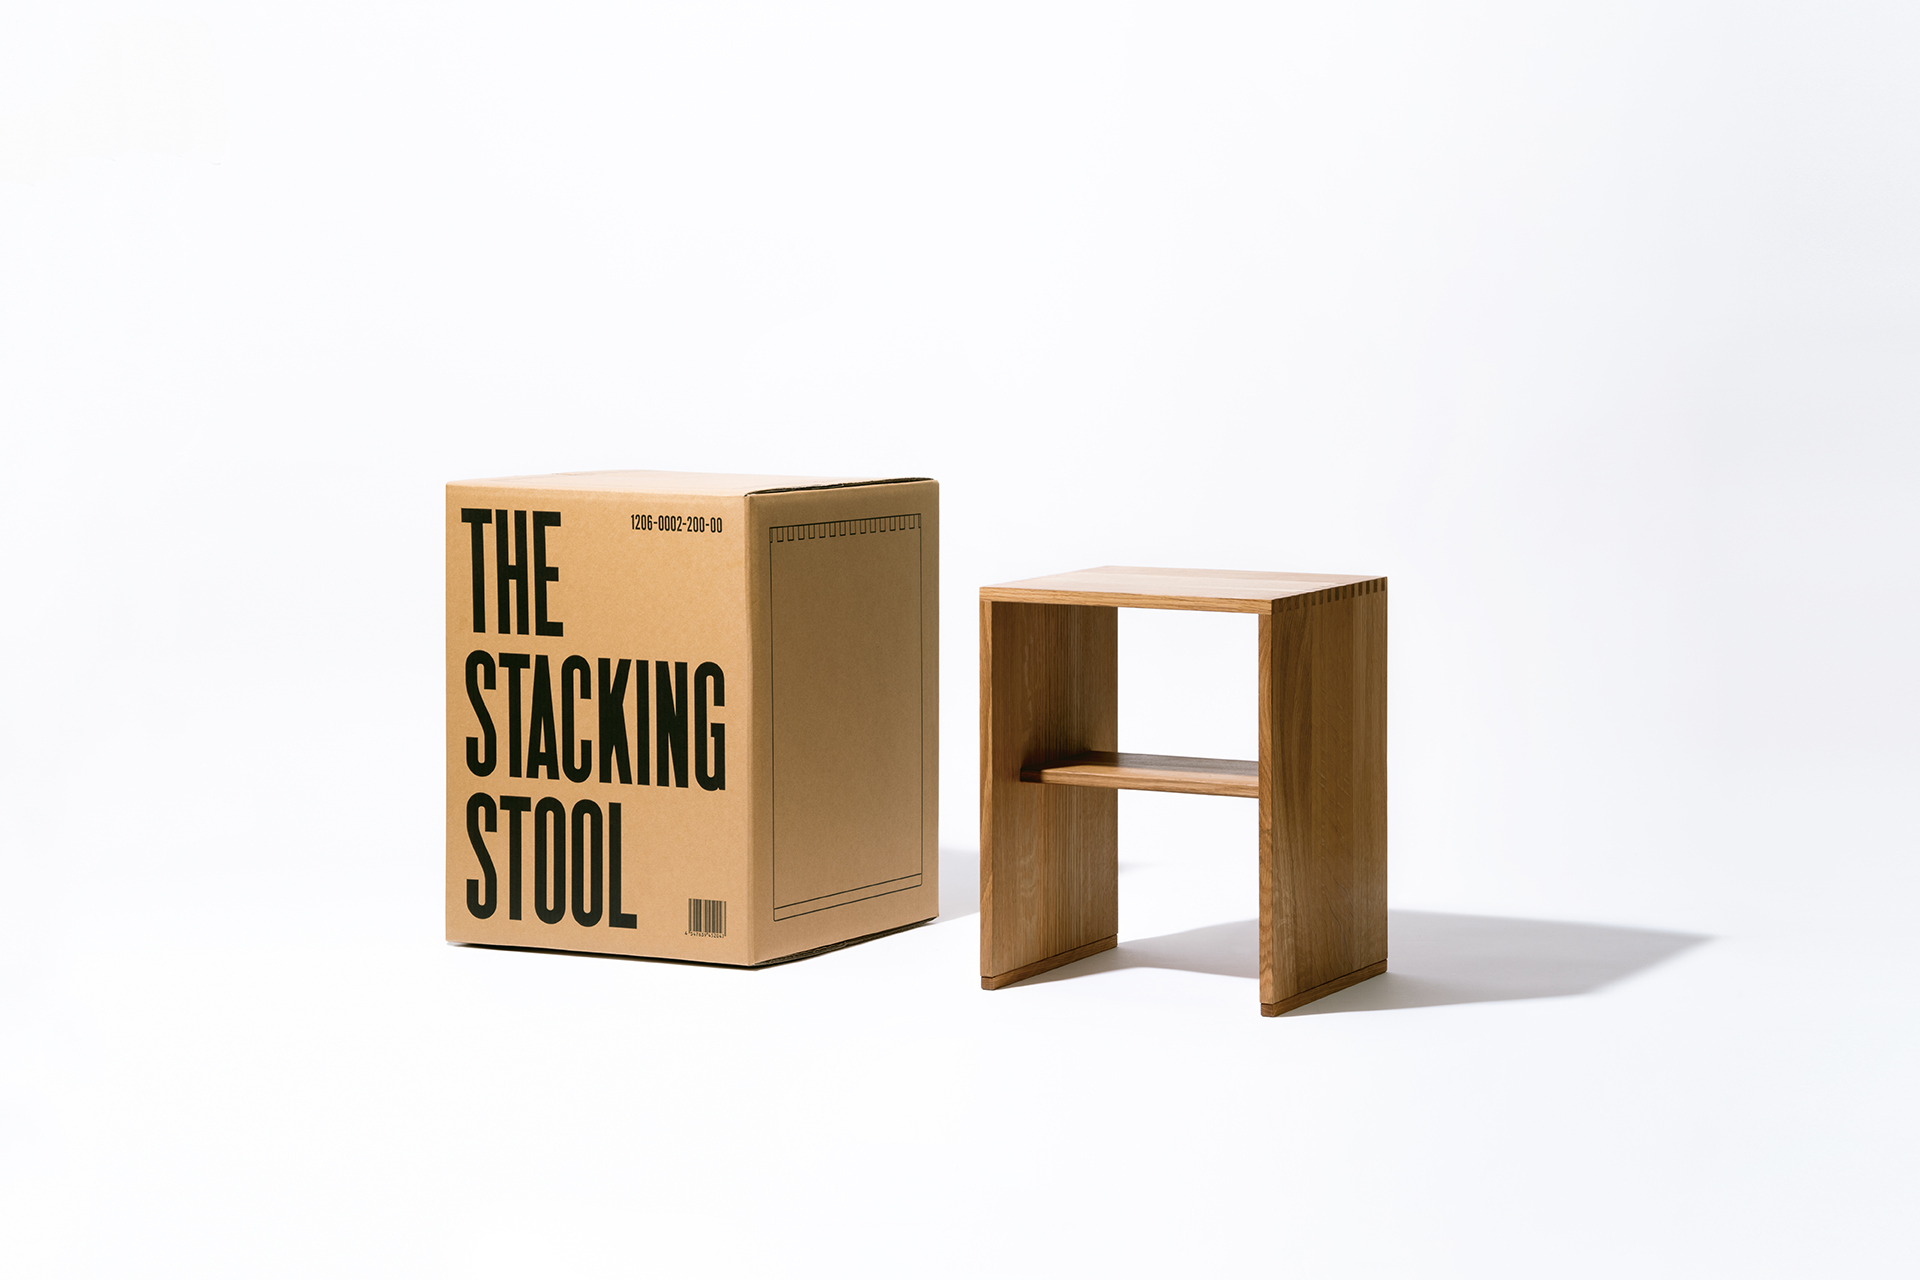 THE STACKING STOOL